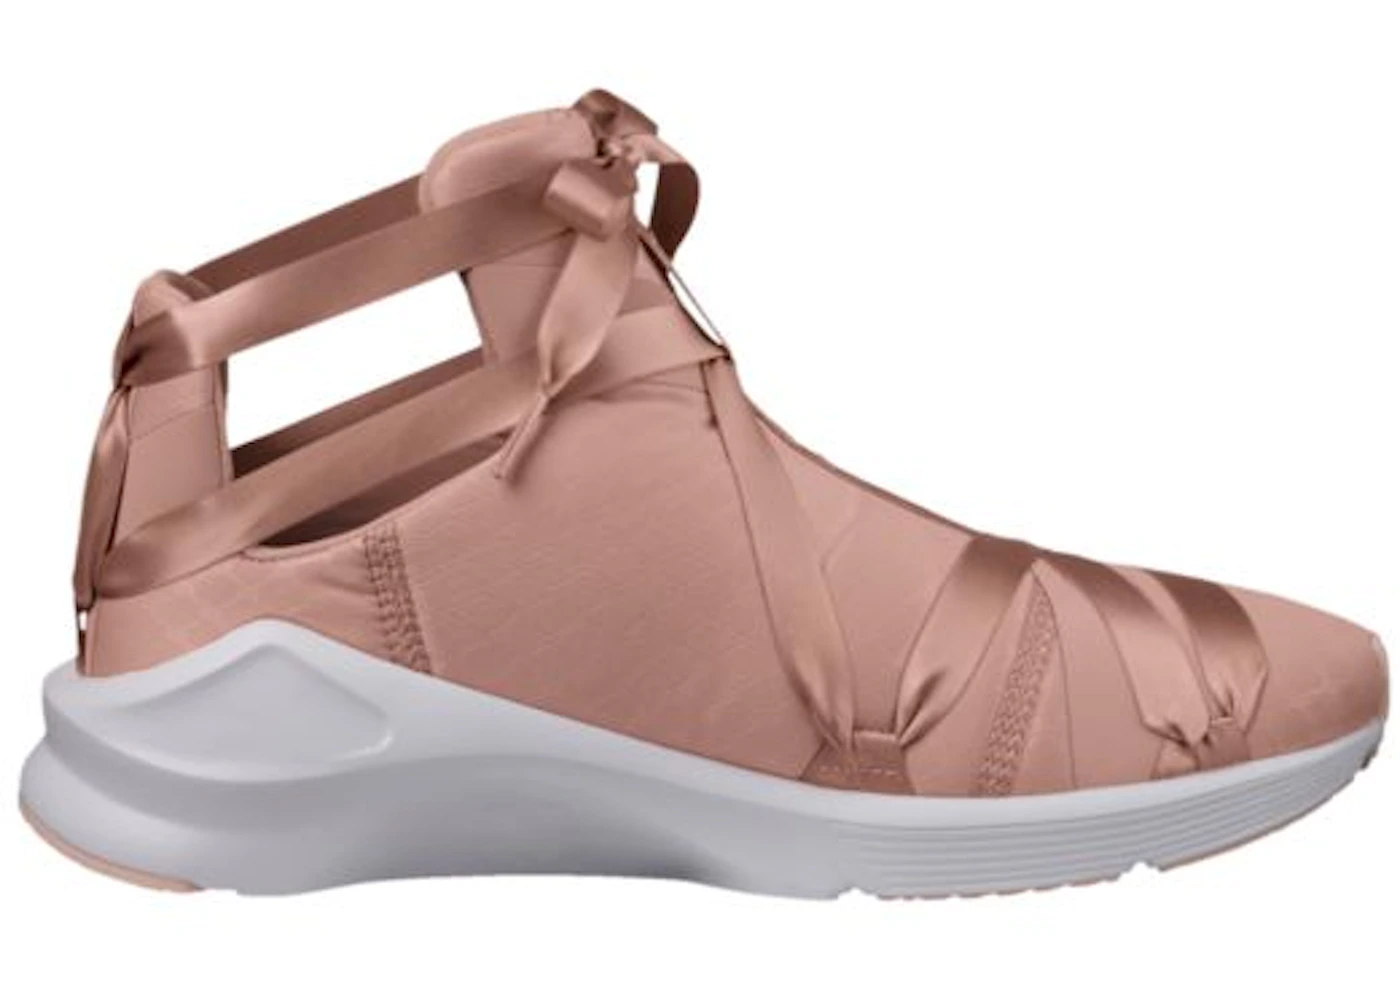 I will be strong preferable The actual Puma Fierce Rope Satin EP Peach Beige (W) - 190538-01 - US